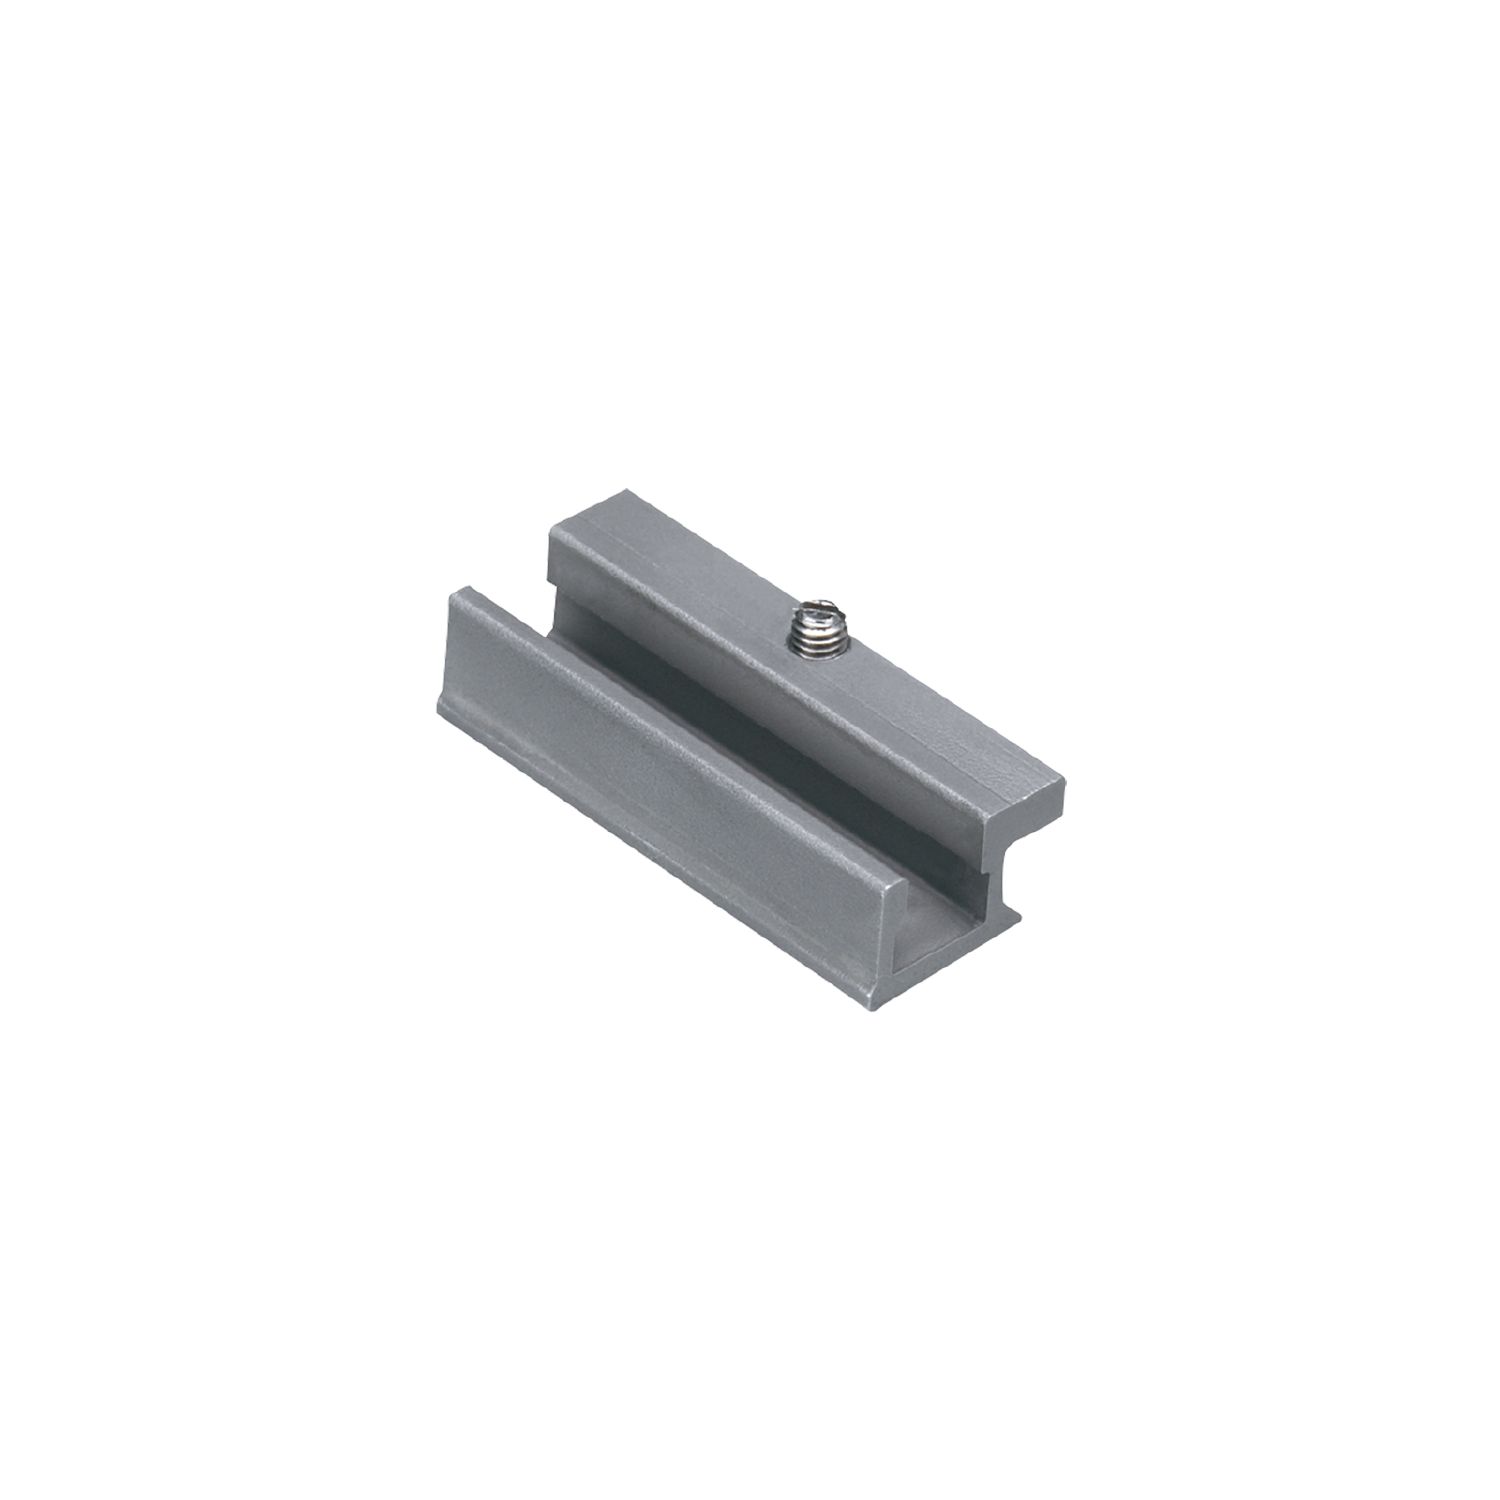 E11796 - Mounting adapter for trapezoidal slot cylinders - ifm